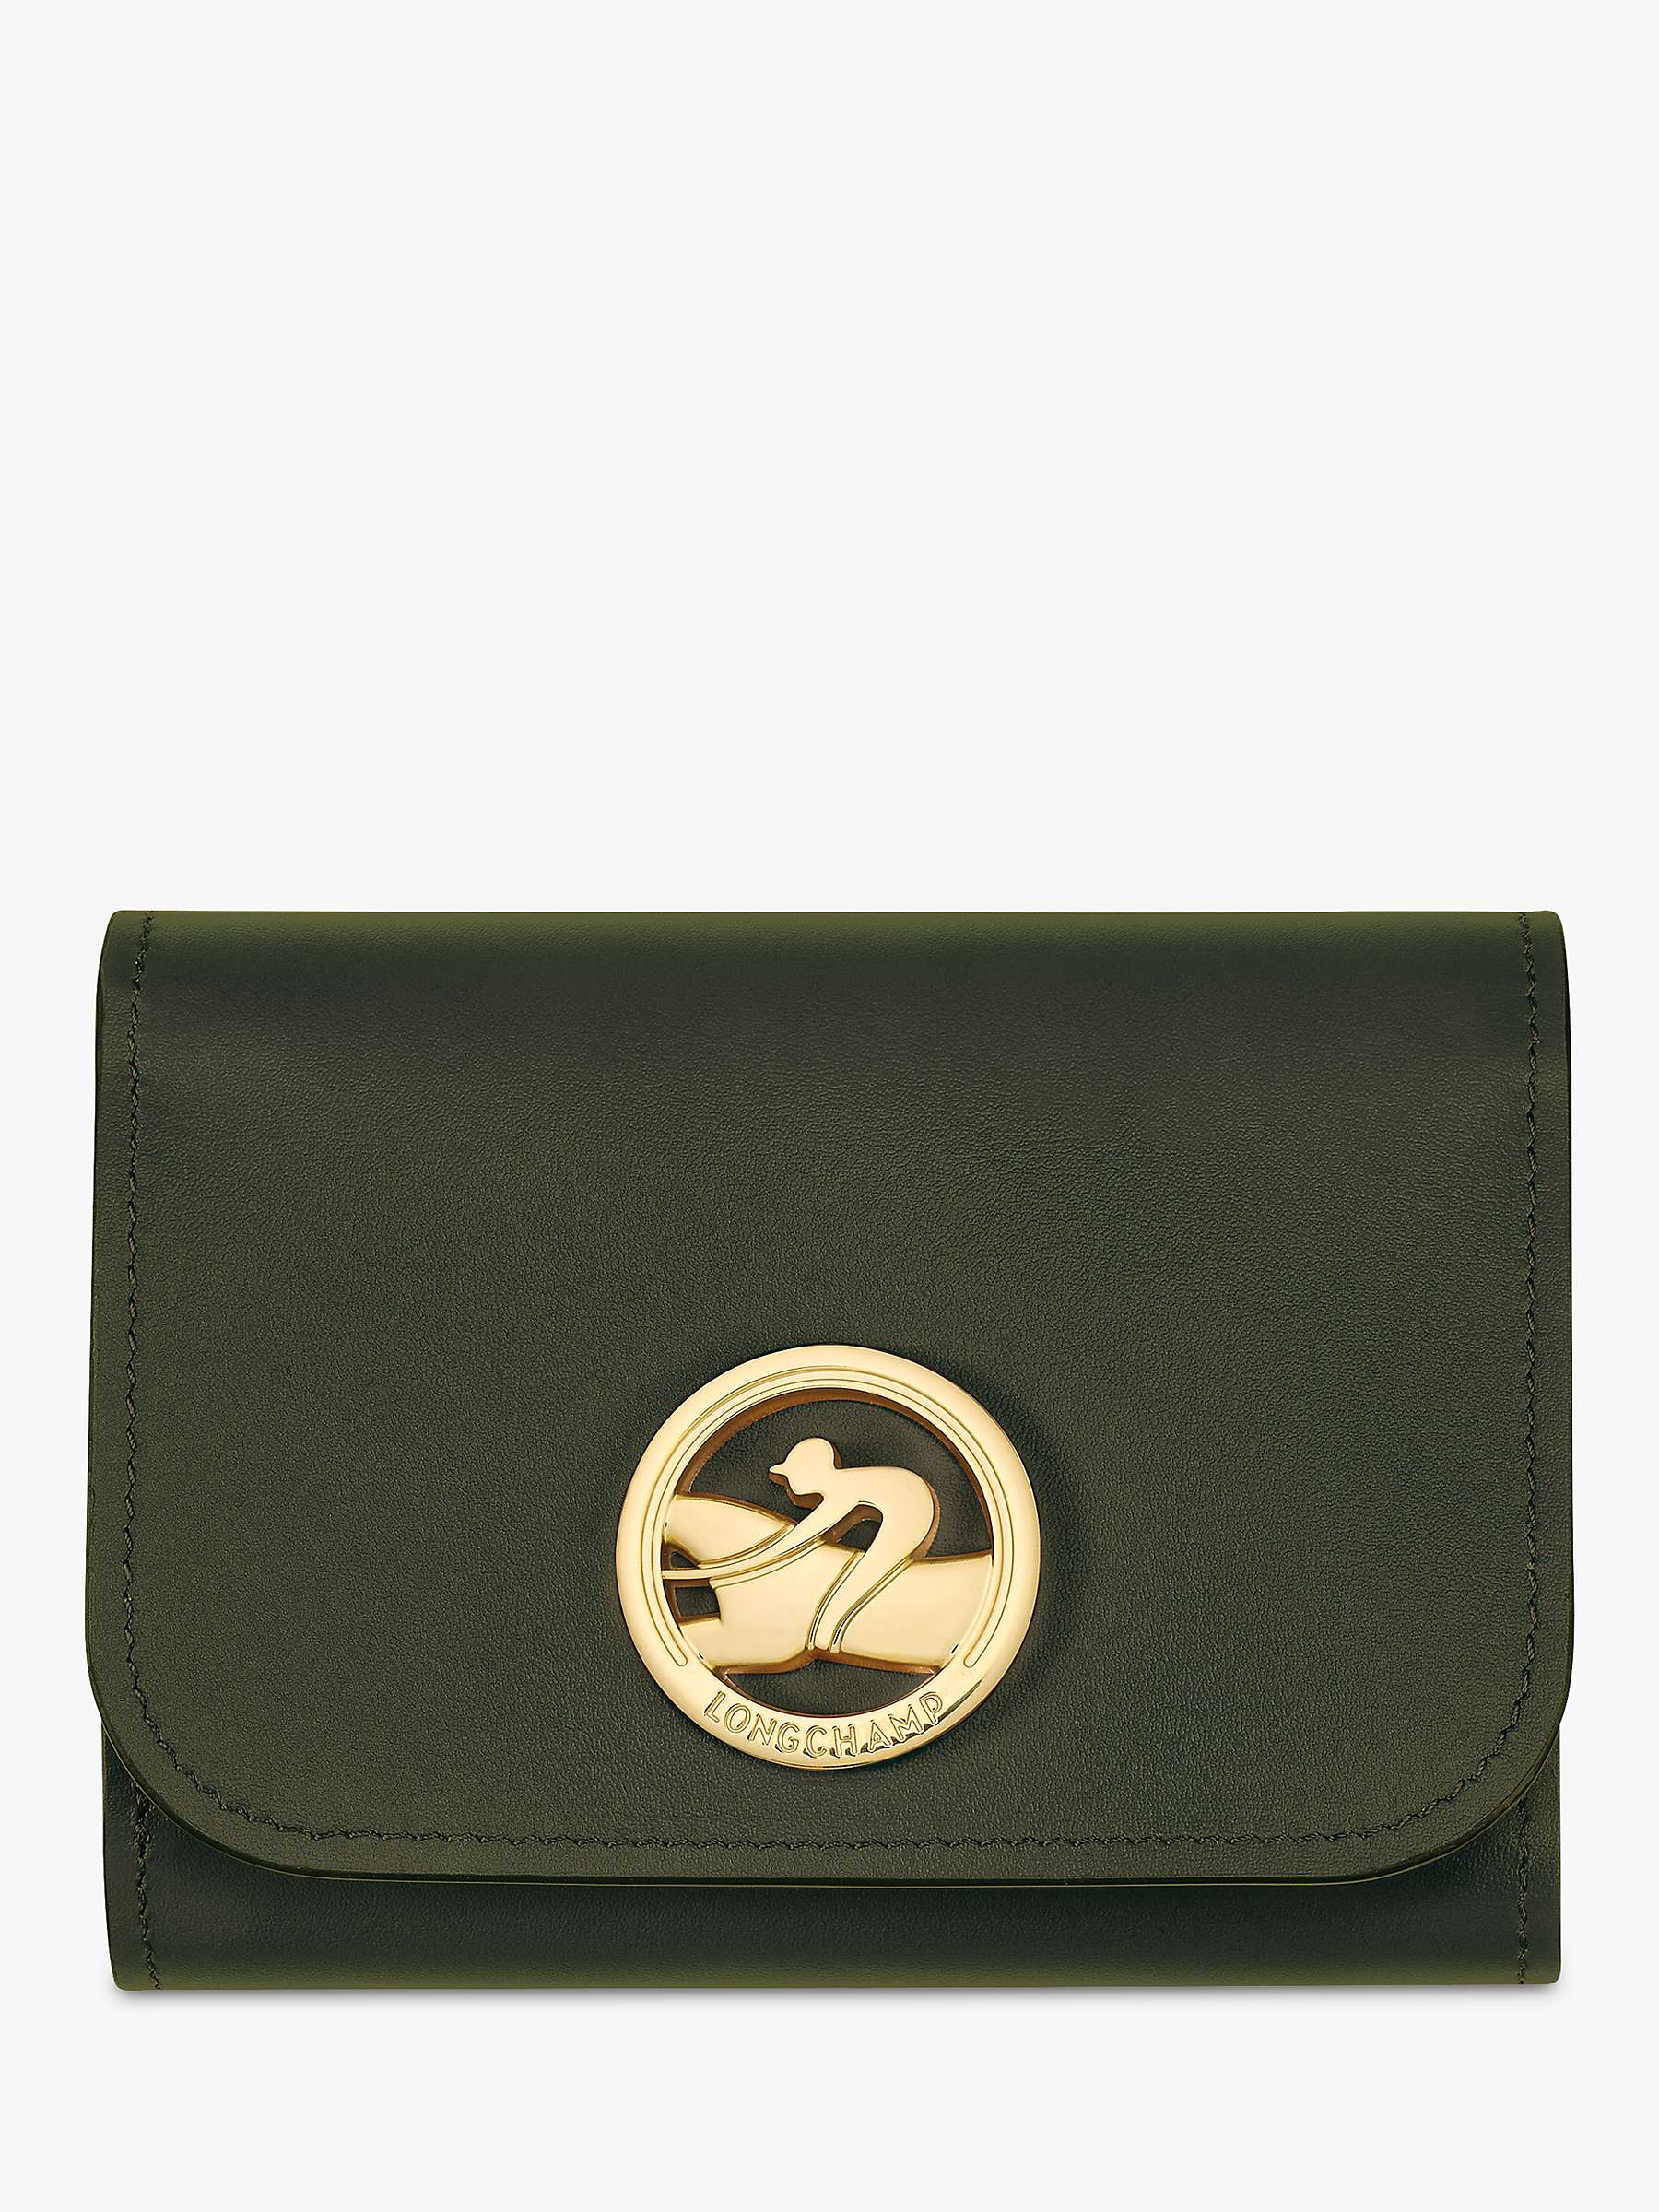 Buy Longchamp Box-Trot Compact Leather Wallet Online at johnlewis.com